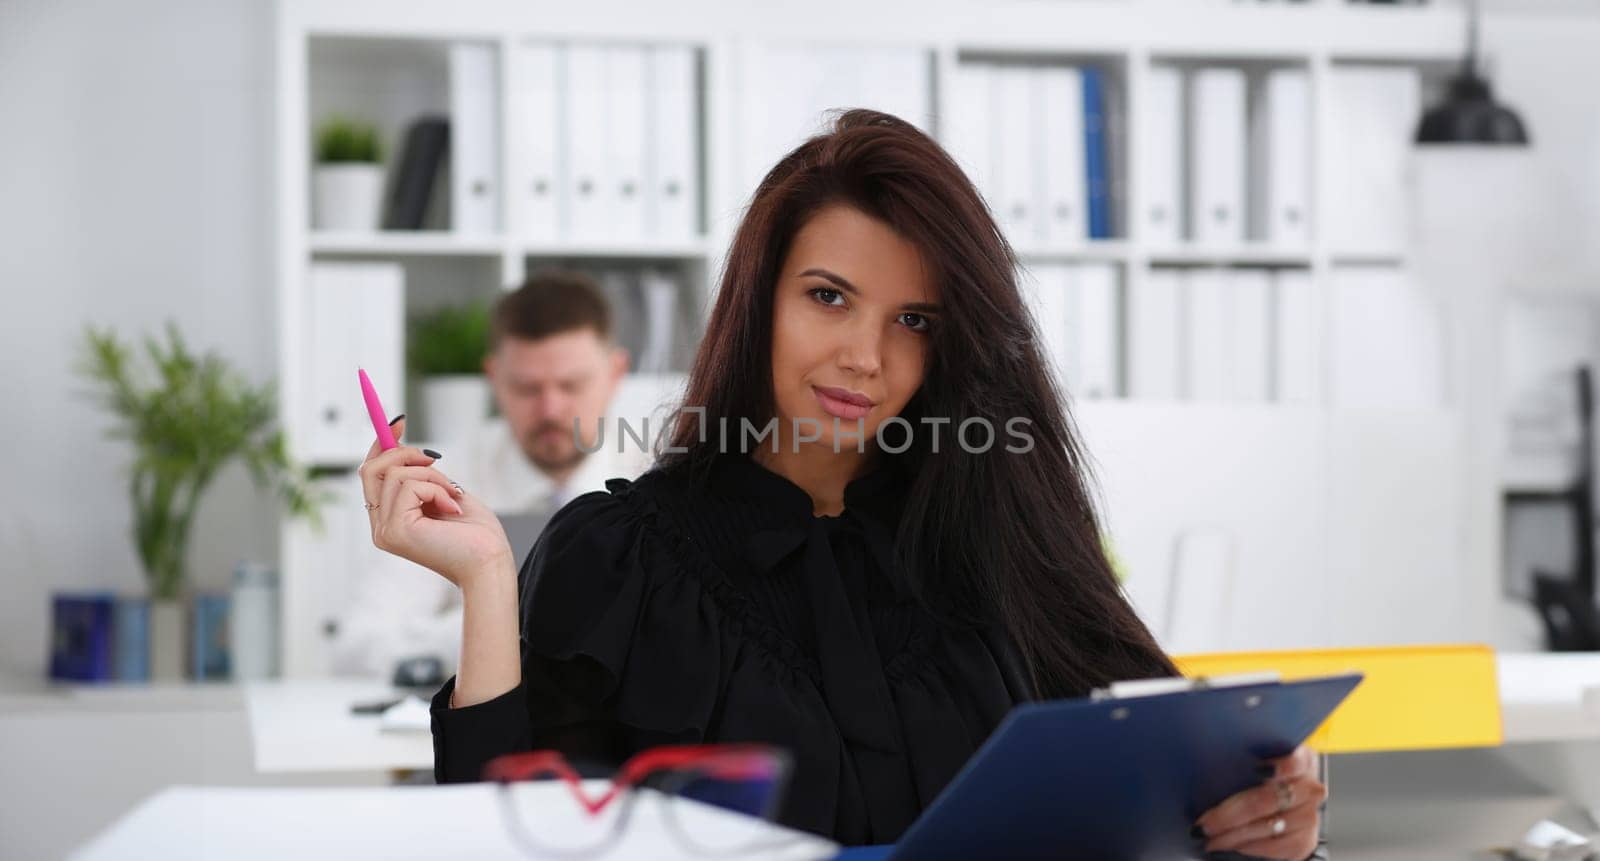 Beautiful smiling brunette woman hold in arms pink pen and paper clipped to pad portrait. White collar worker at workspace officer highly pay smart serious headhunter offer